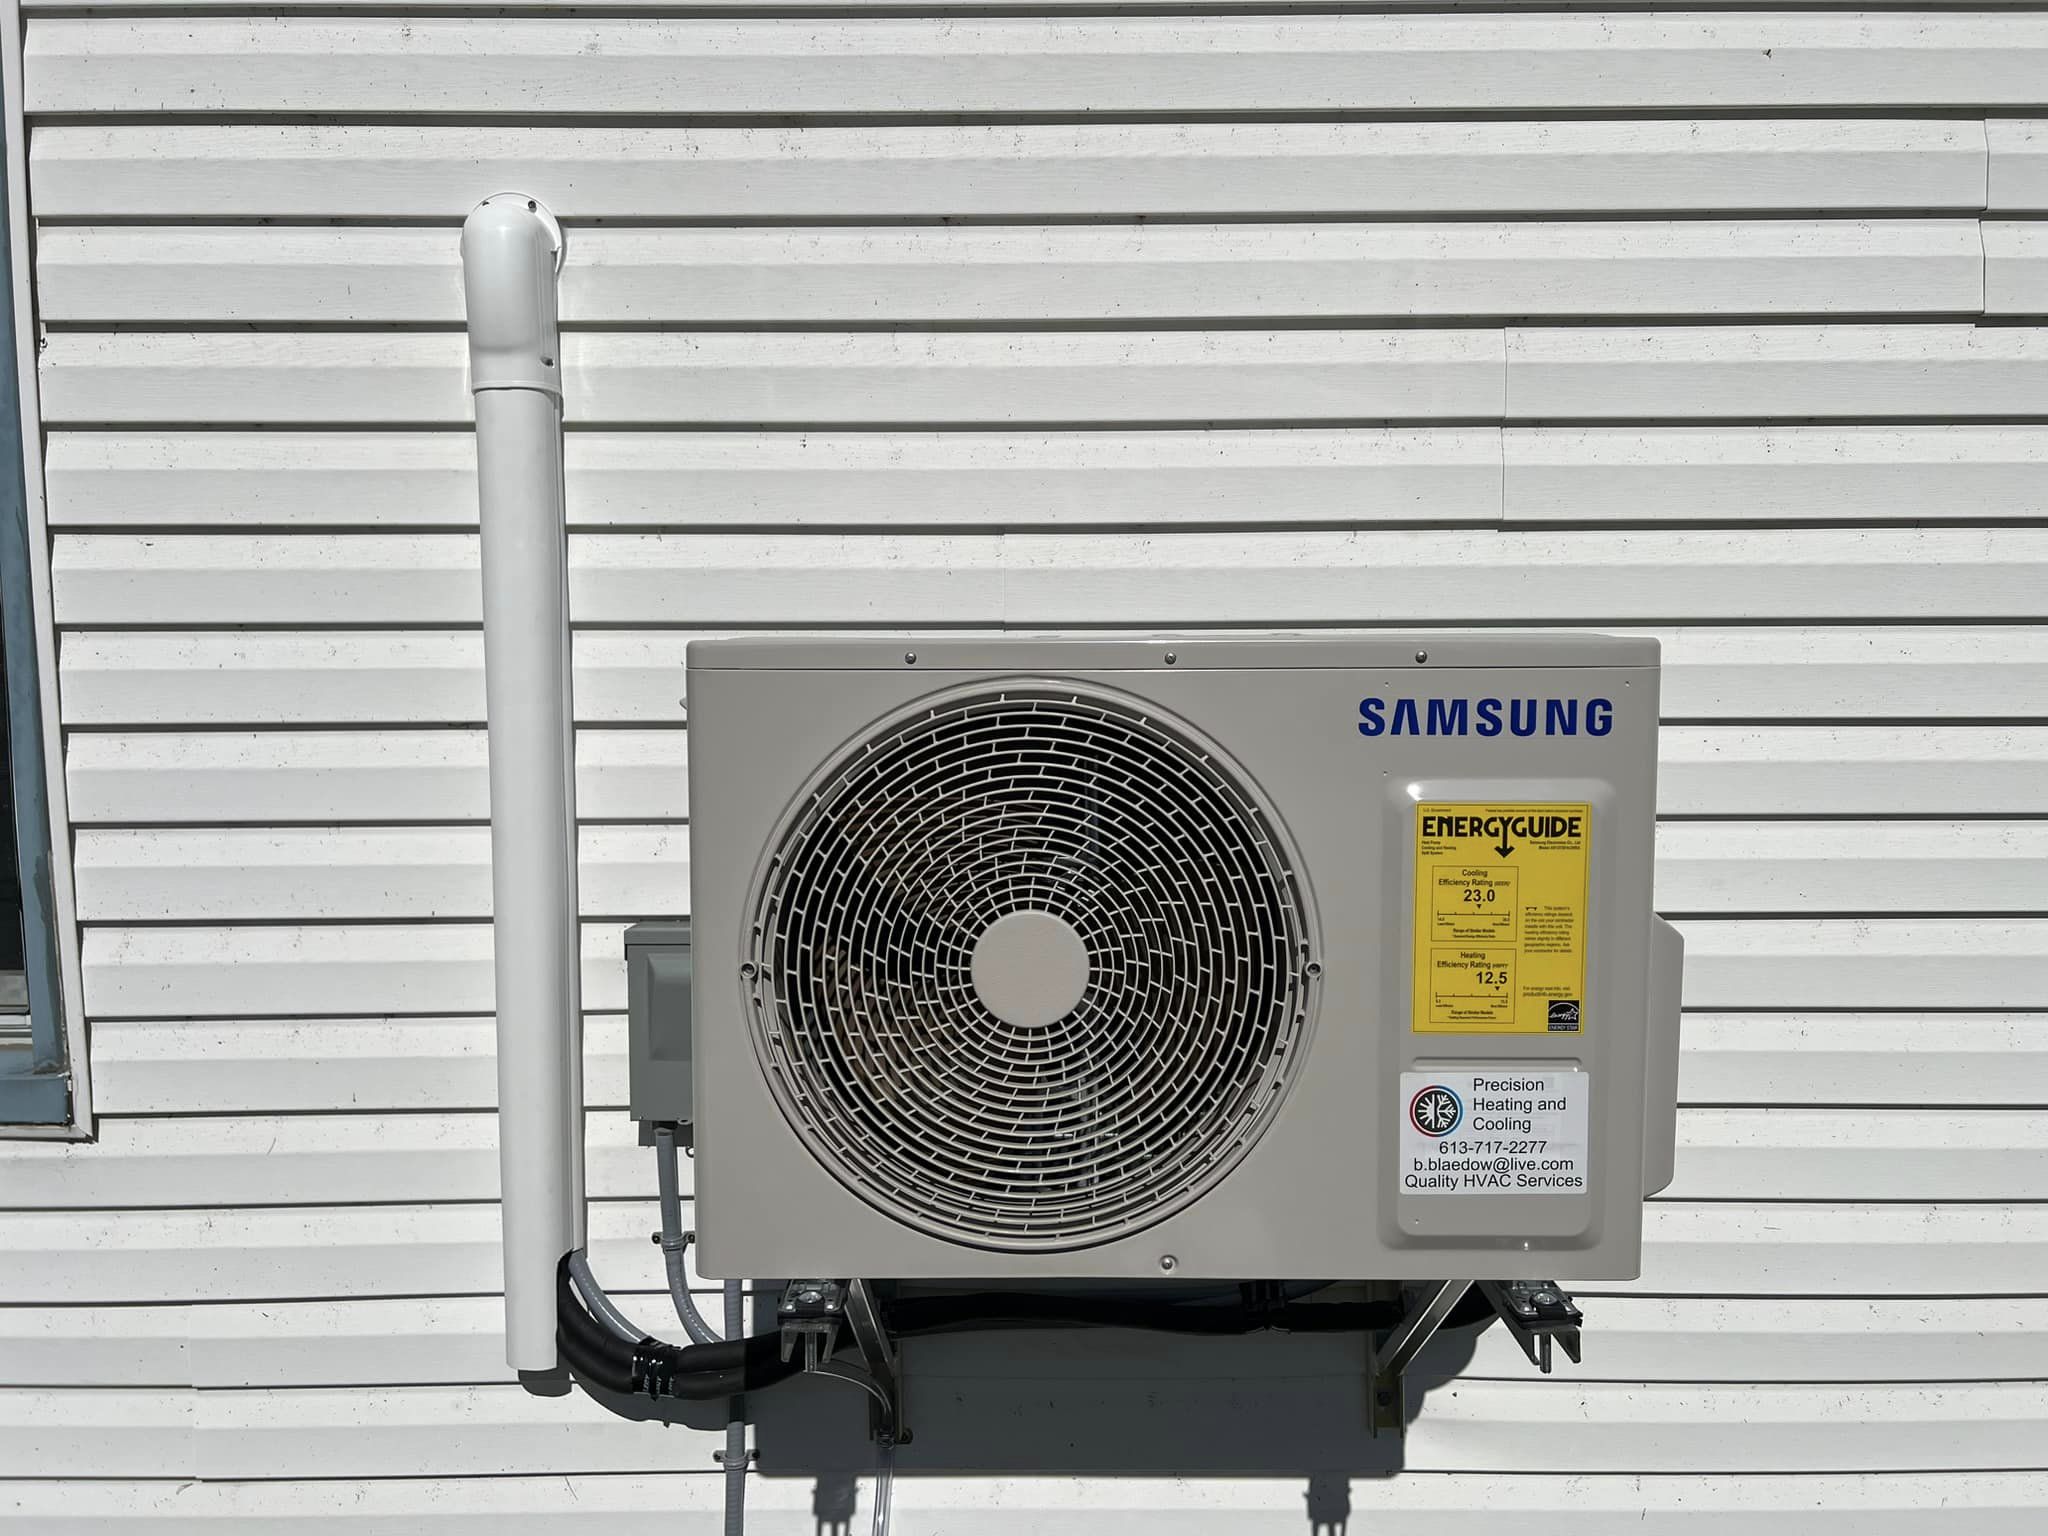 How To Fix The Error Code E241 For Samsung Air Conditioner